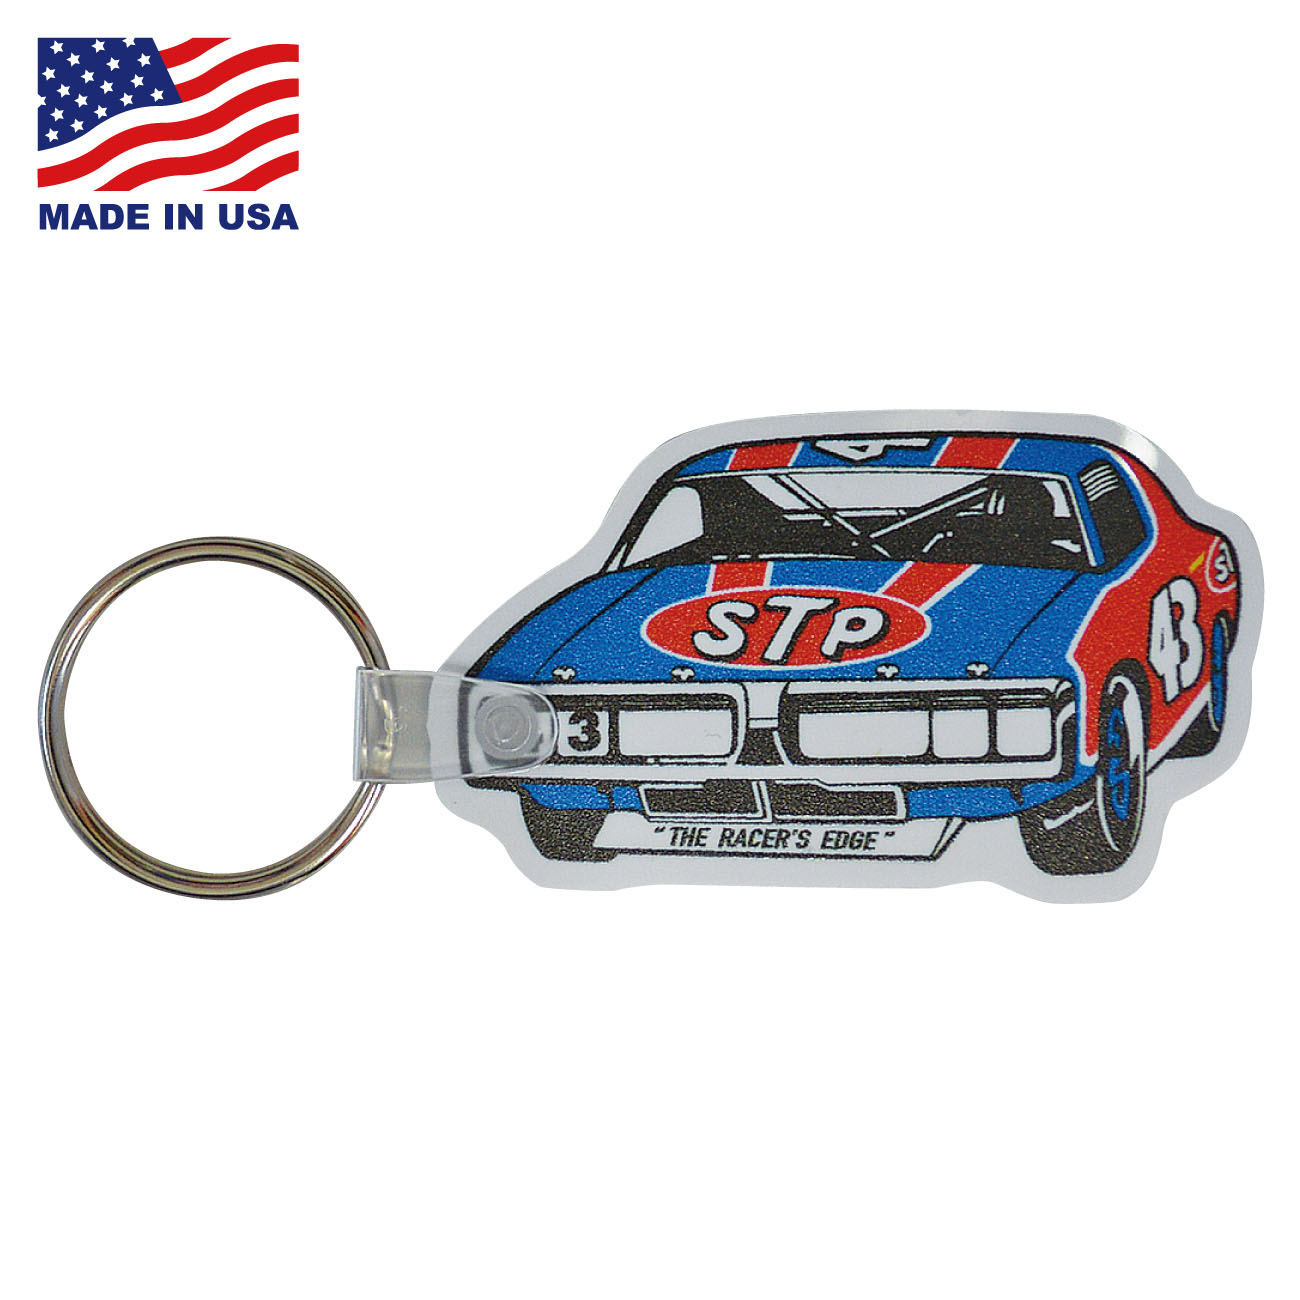 STP RUBBER KEYCHAIN【CAR】MADE IN USA